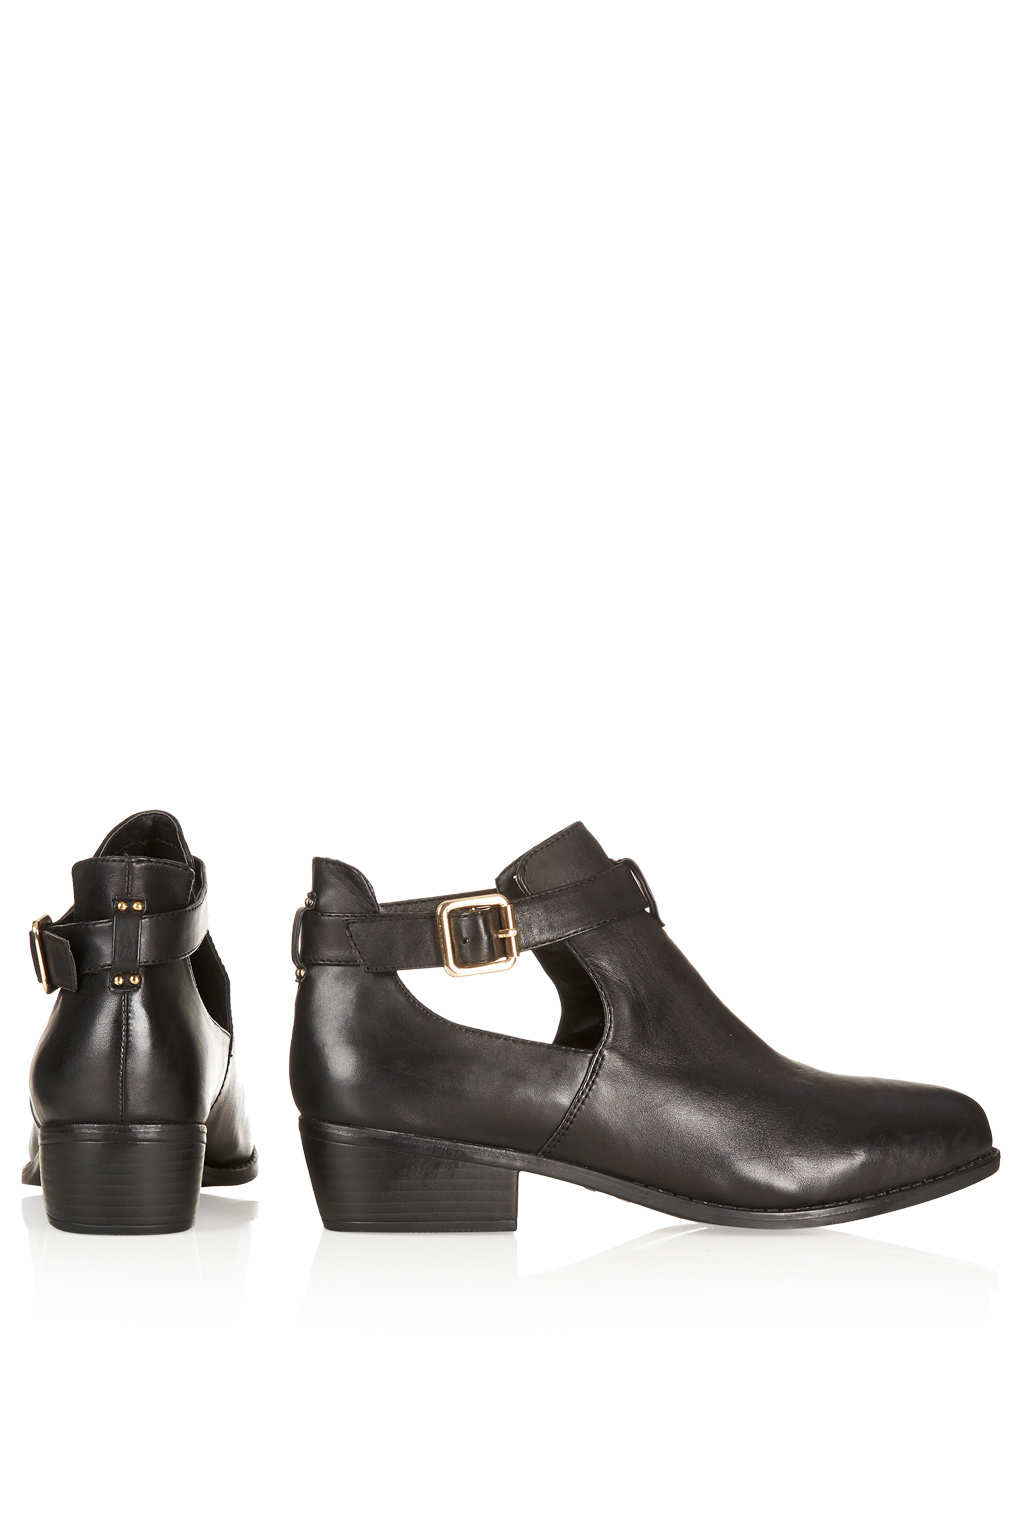 TOPSHOP Monti Cut Out Leather Boots in Black - Lyst